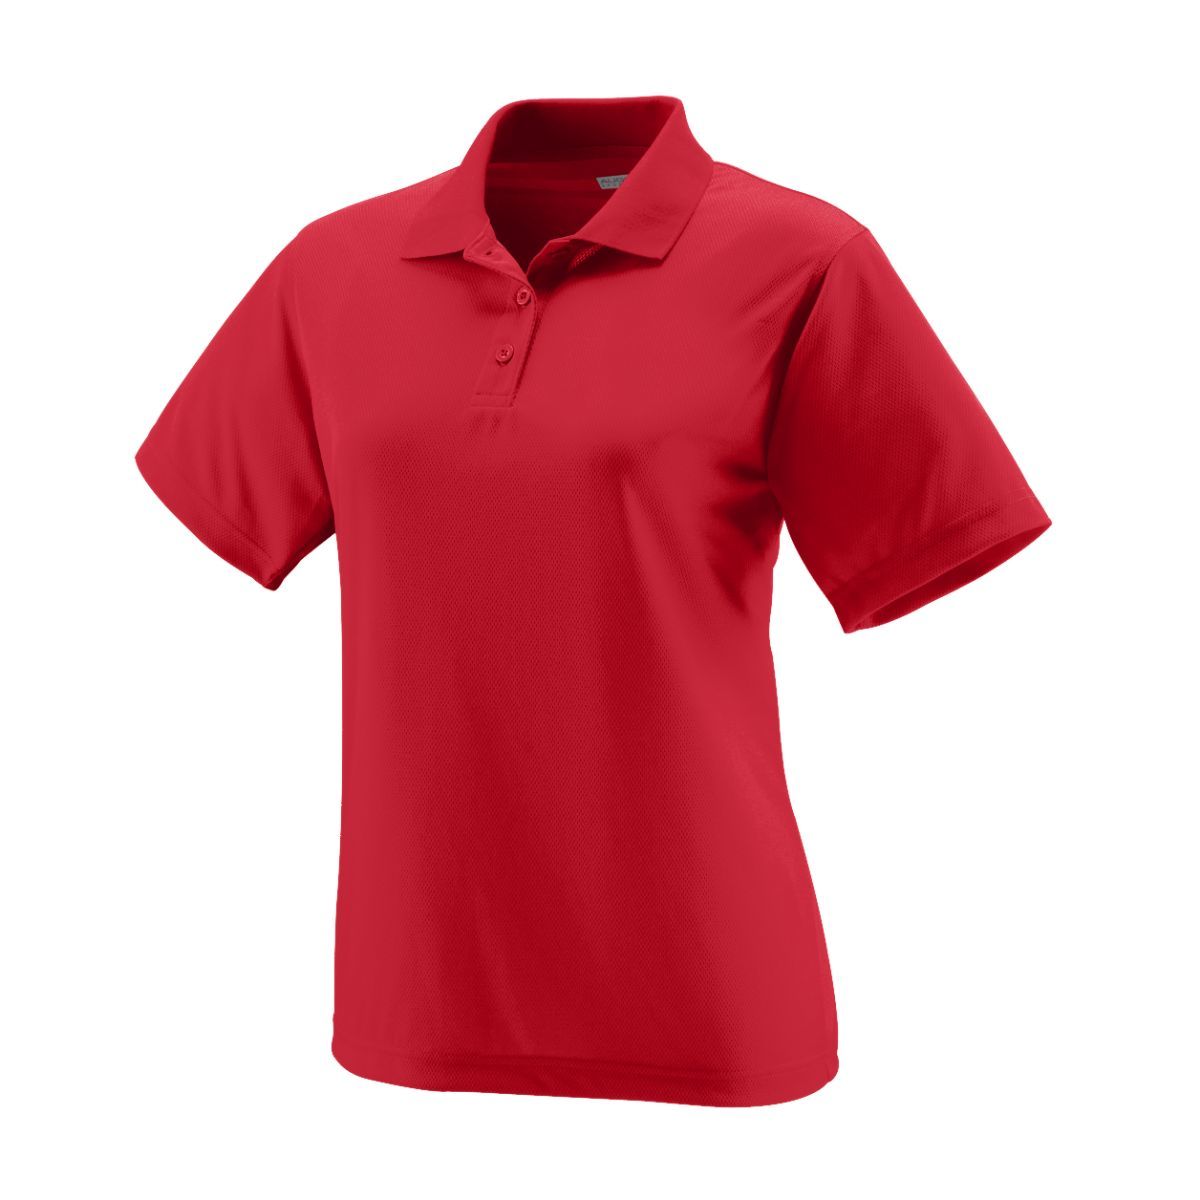 Augusta Sportswear Ladies Wicking Mesh Polo in Red  -Part of the Ladies, Ladies-Polo, Polos, Augusta-Products, Tennis, Shirts product lines at KanaleyCreations.com